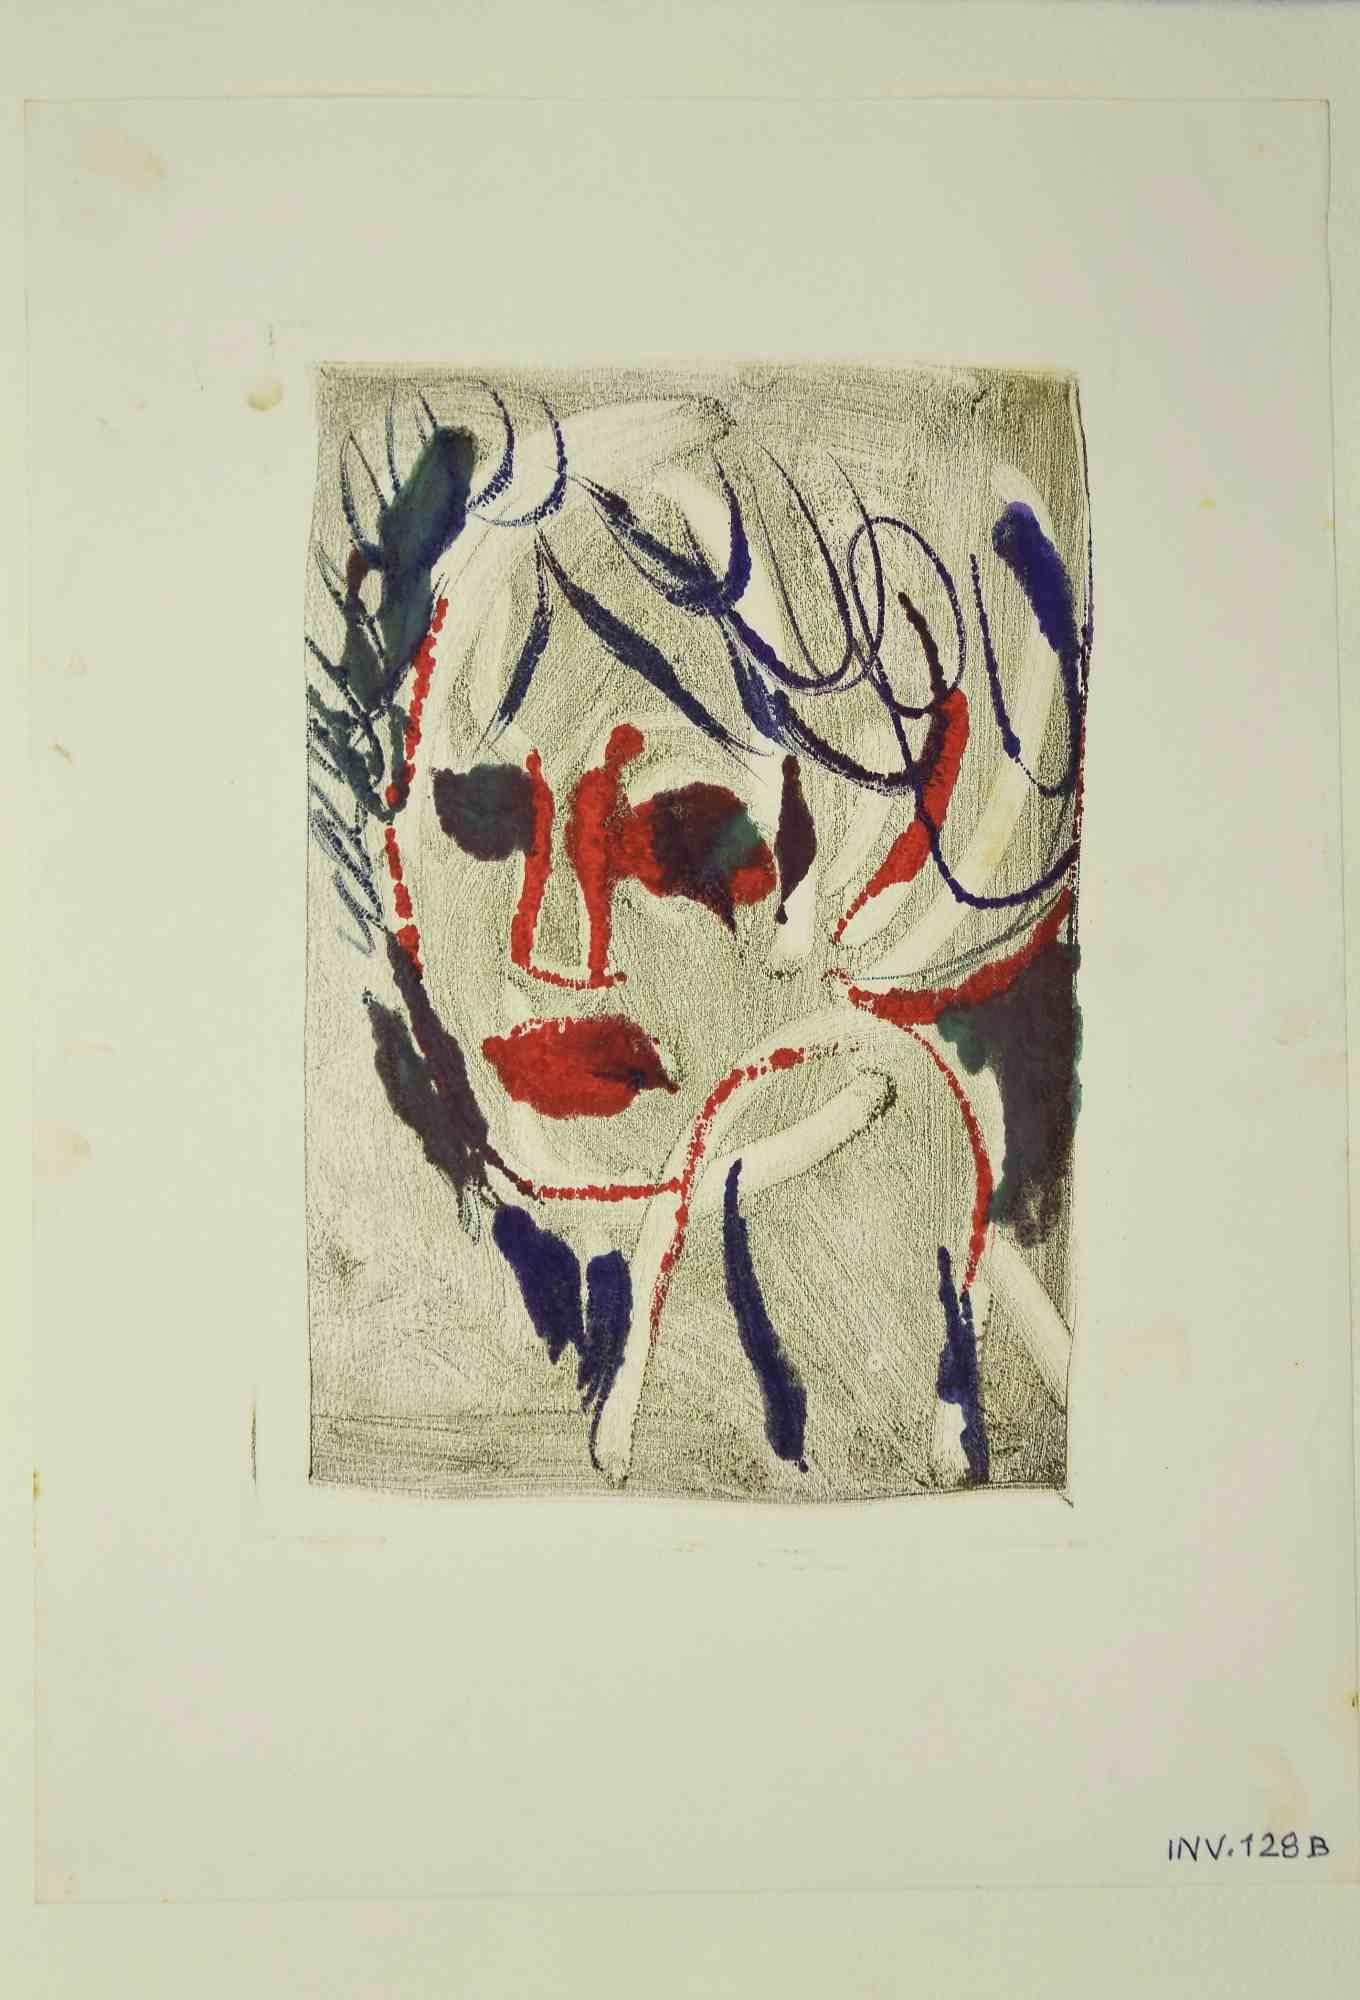 Portrait is an original drawing in charcoal and watercolor on paper realized by Leo Guida in the 1970s.

Good condition.

Leo Guida  (1992 - 2017). Sensitive to current issues, artistic movements and historical techniques, Leo Guida has been able to